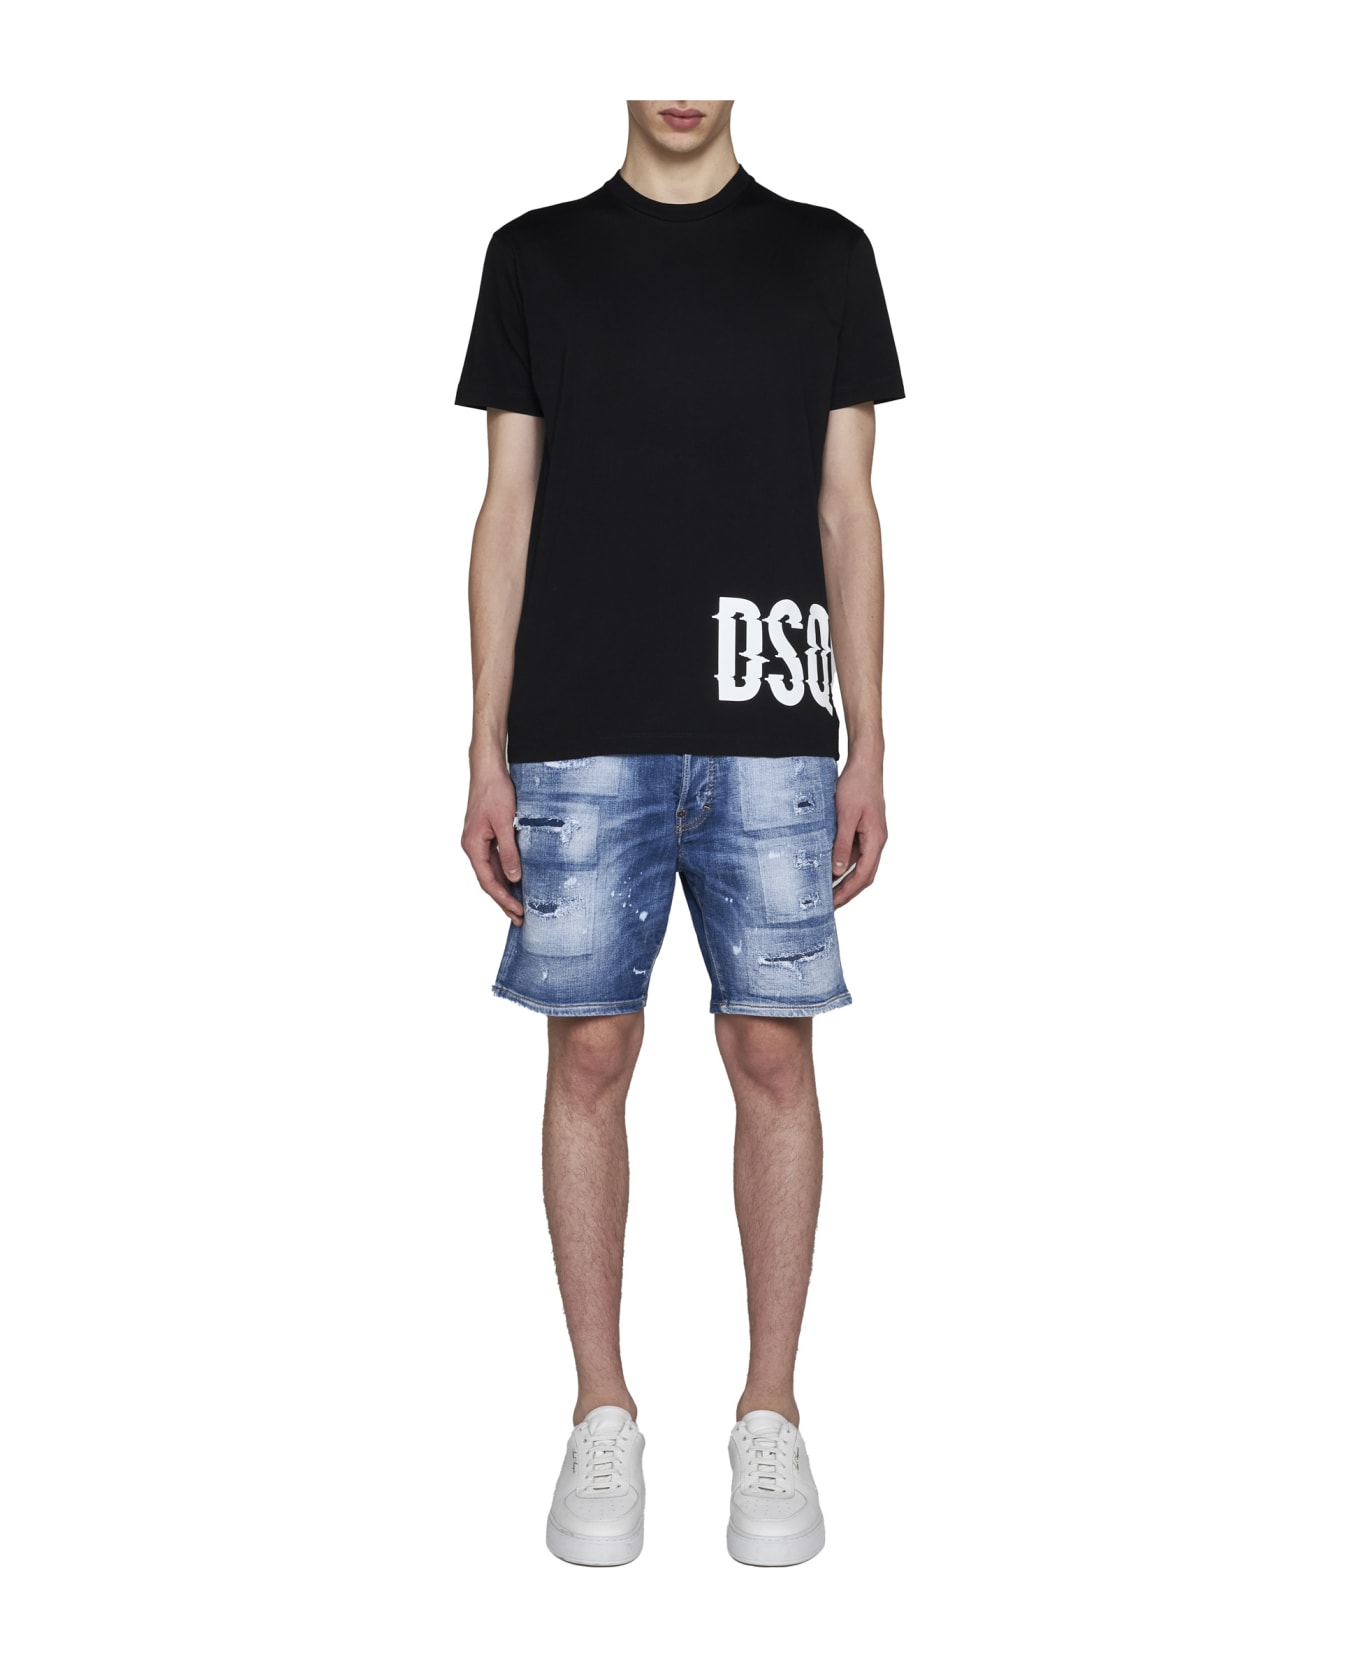 Dsquared2 Shorts - Navy blue